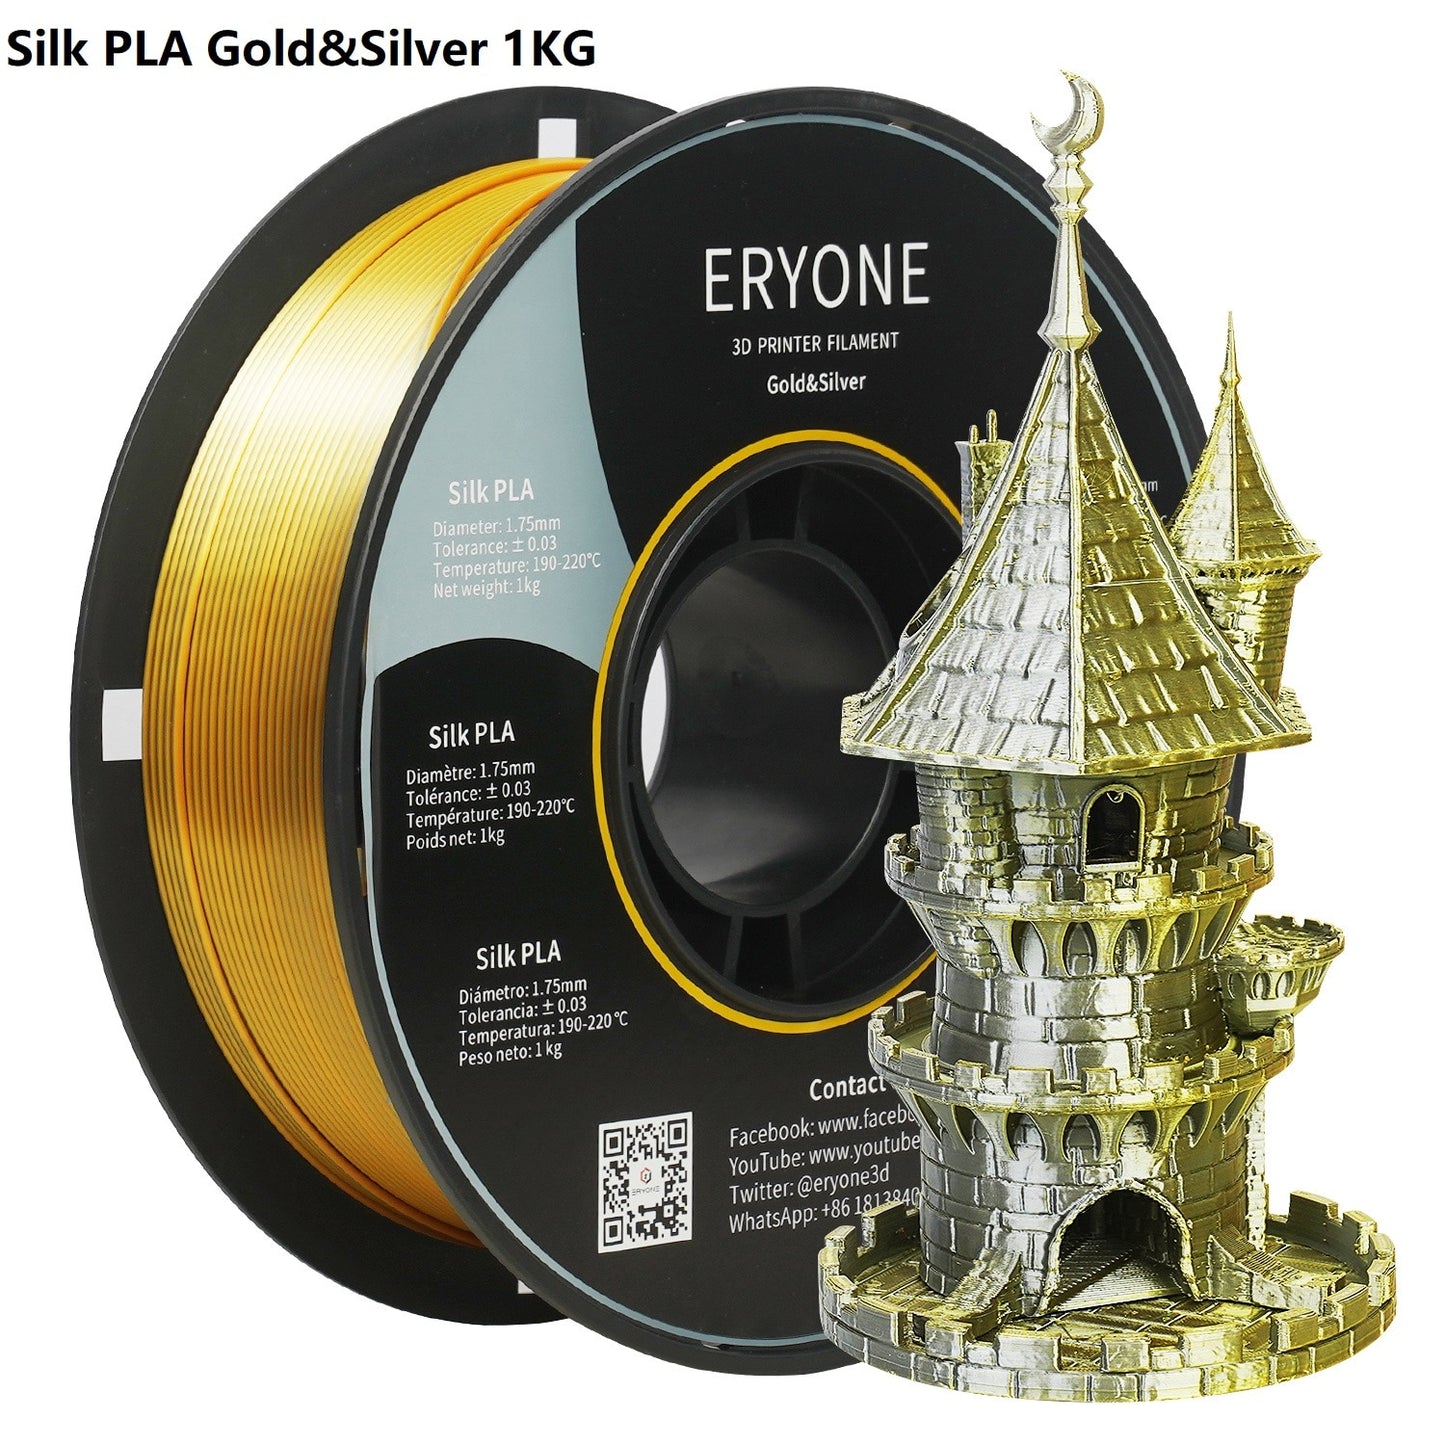 ERYONE Promotion Dual Color Series Matte PLA And Silk PLA 1.75mm For 3D Printing FDM Printer